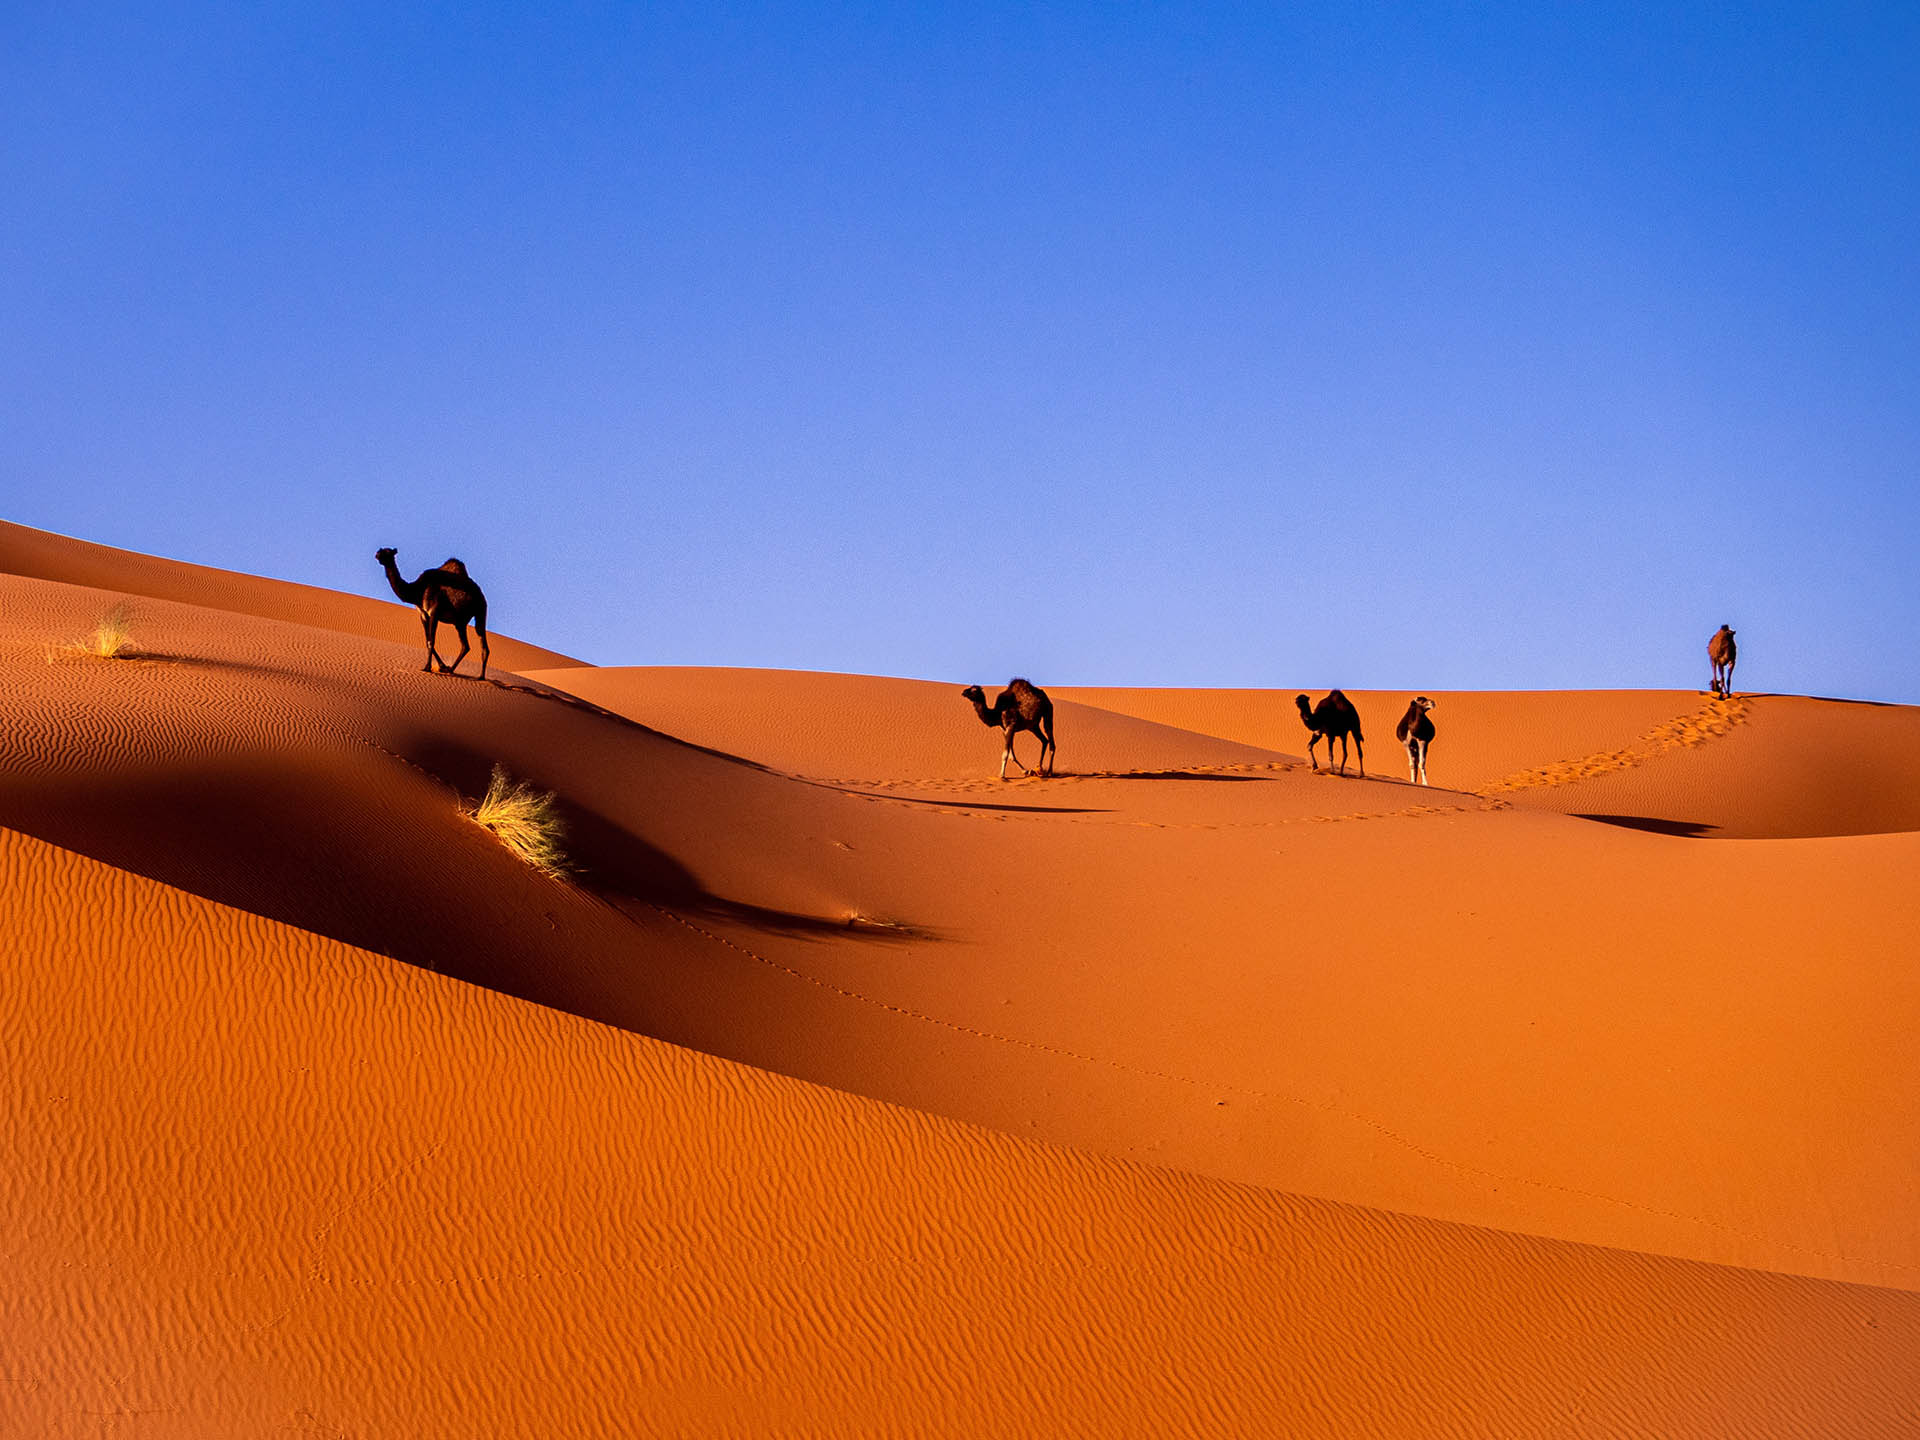 Week in the red dunes of Merzouga from Ouarzazate